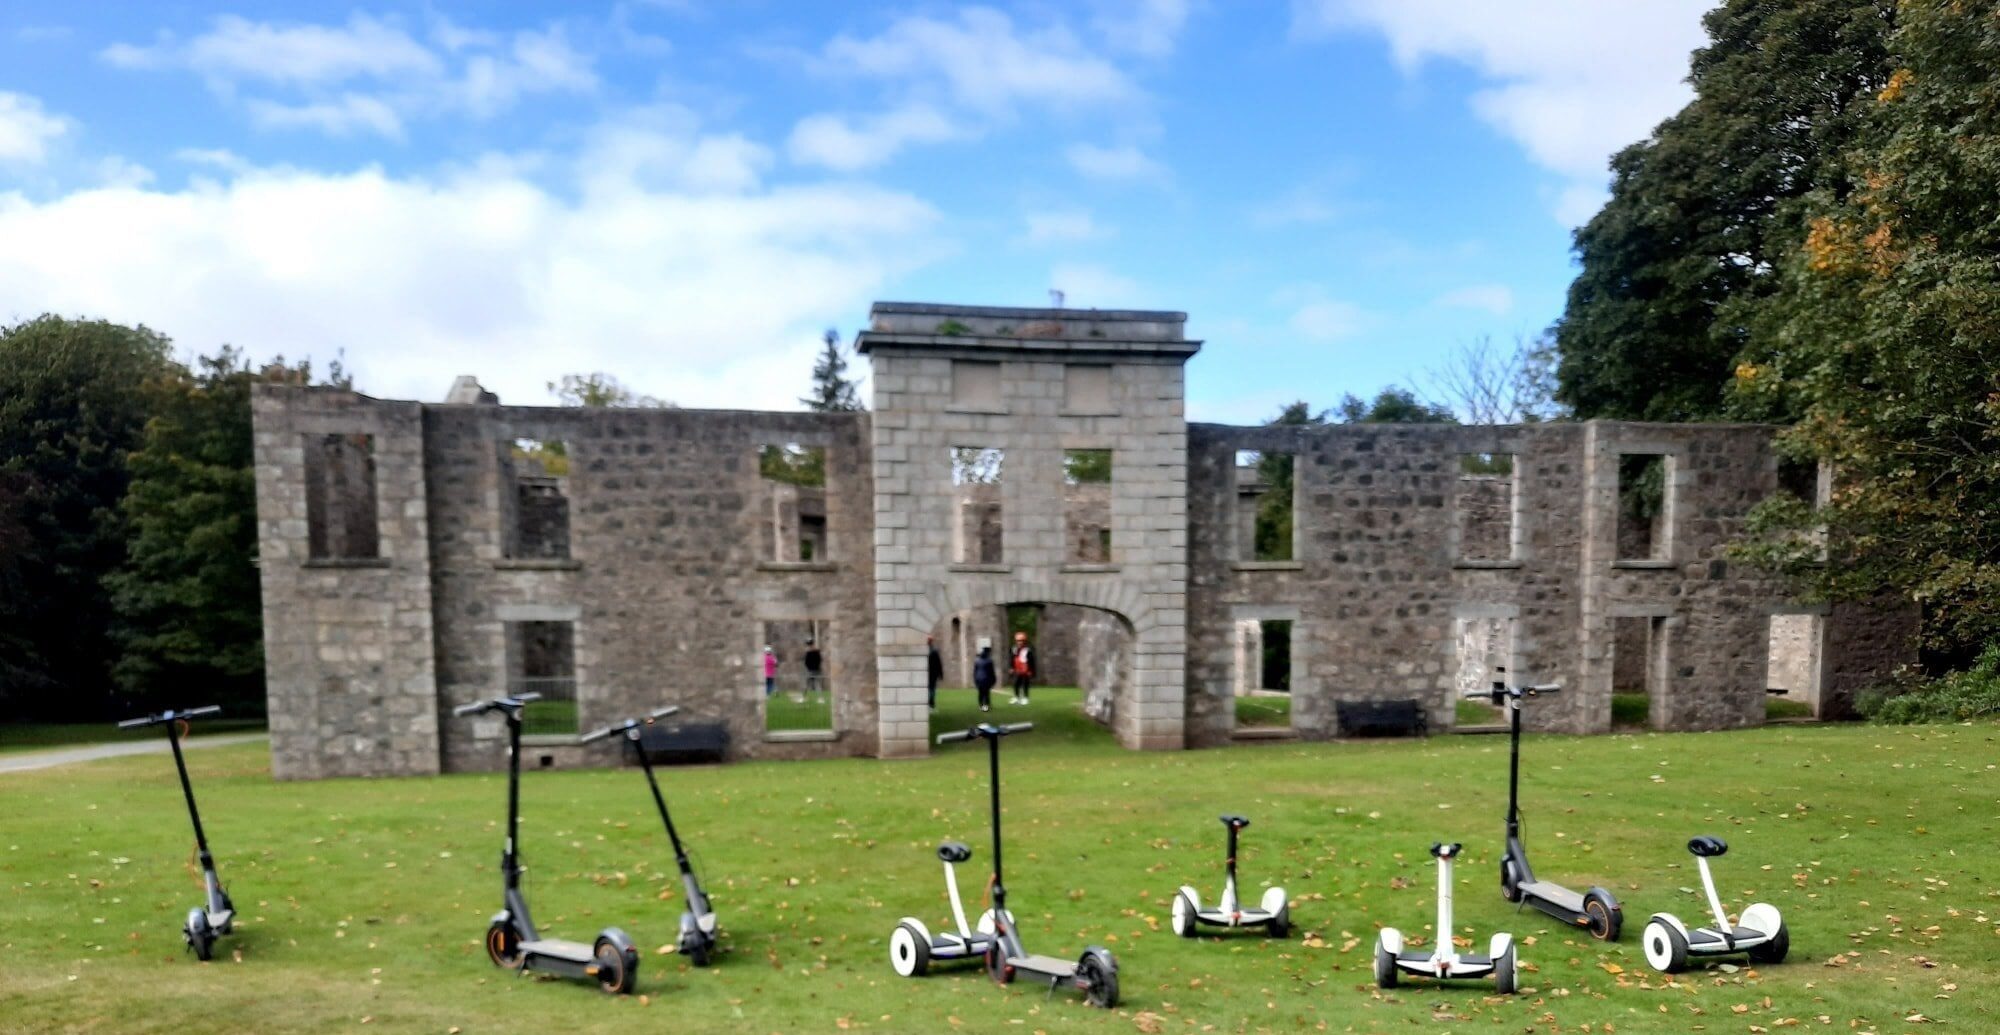 A number of scooters outside a ruin